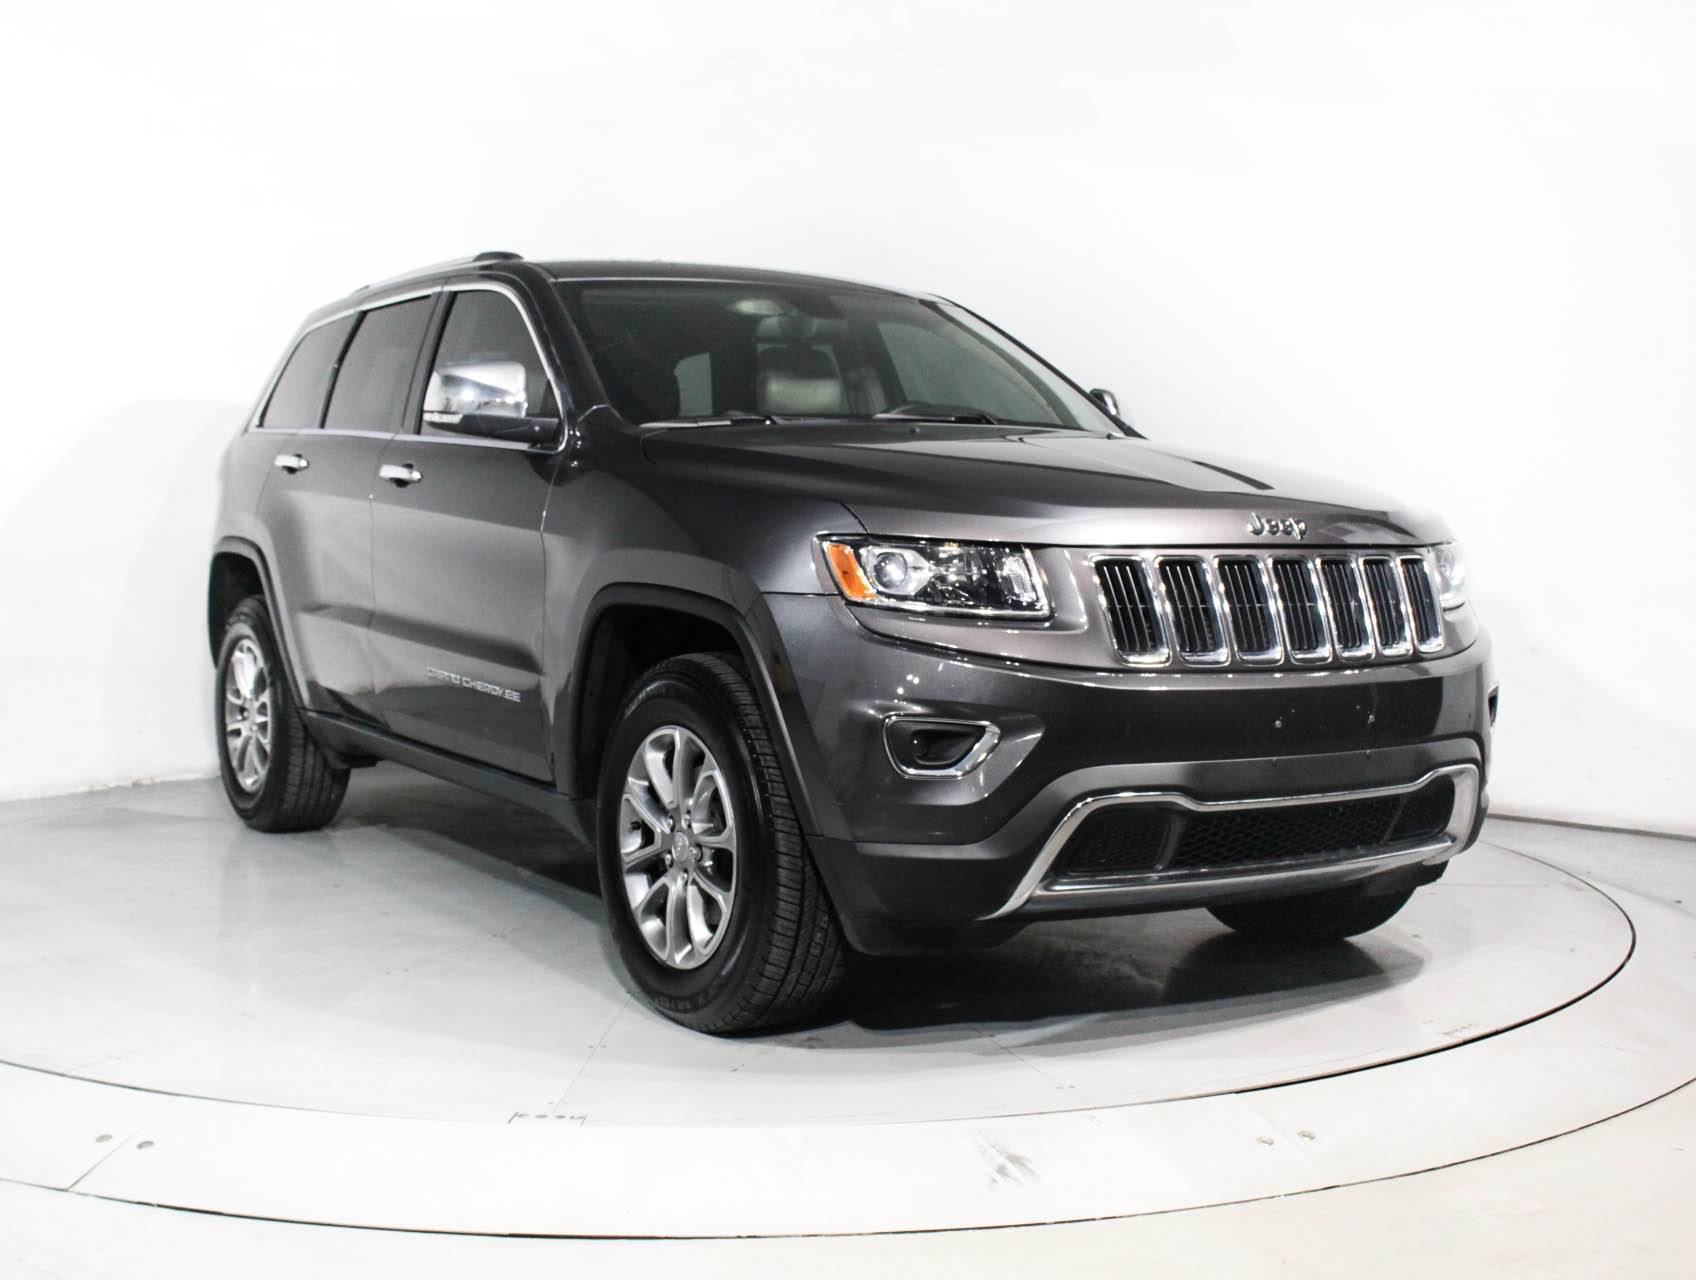 Florida Fine Cars - Used JEEP GRAND CHEROKEE 2014 MARGATE Limited 4wd